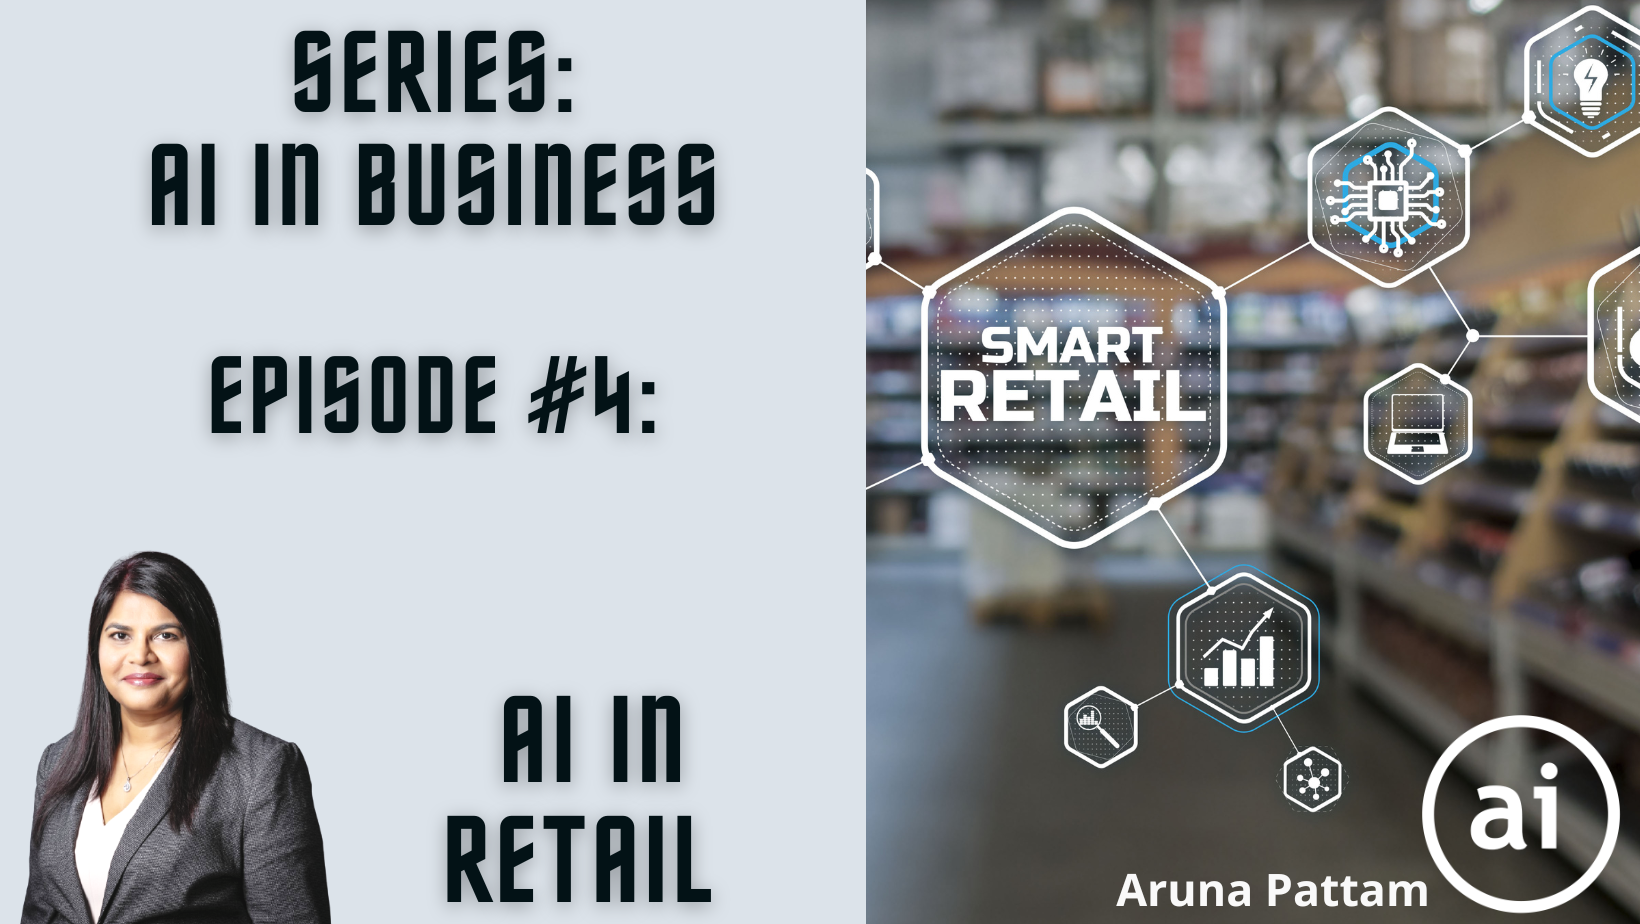 AI in Business Series: Episode #4. AI in Retail